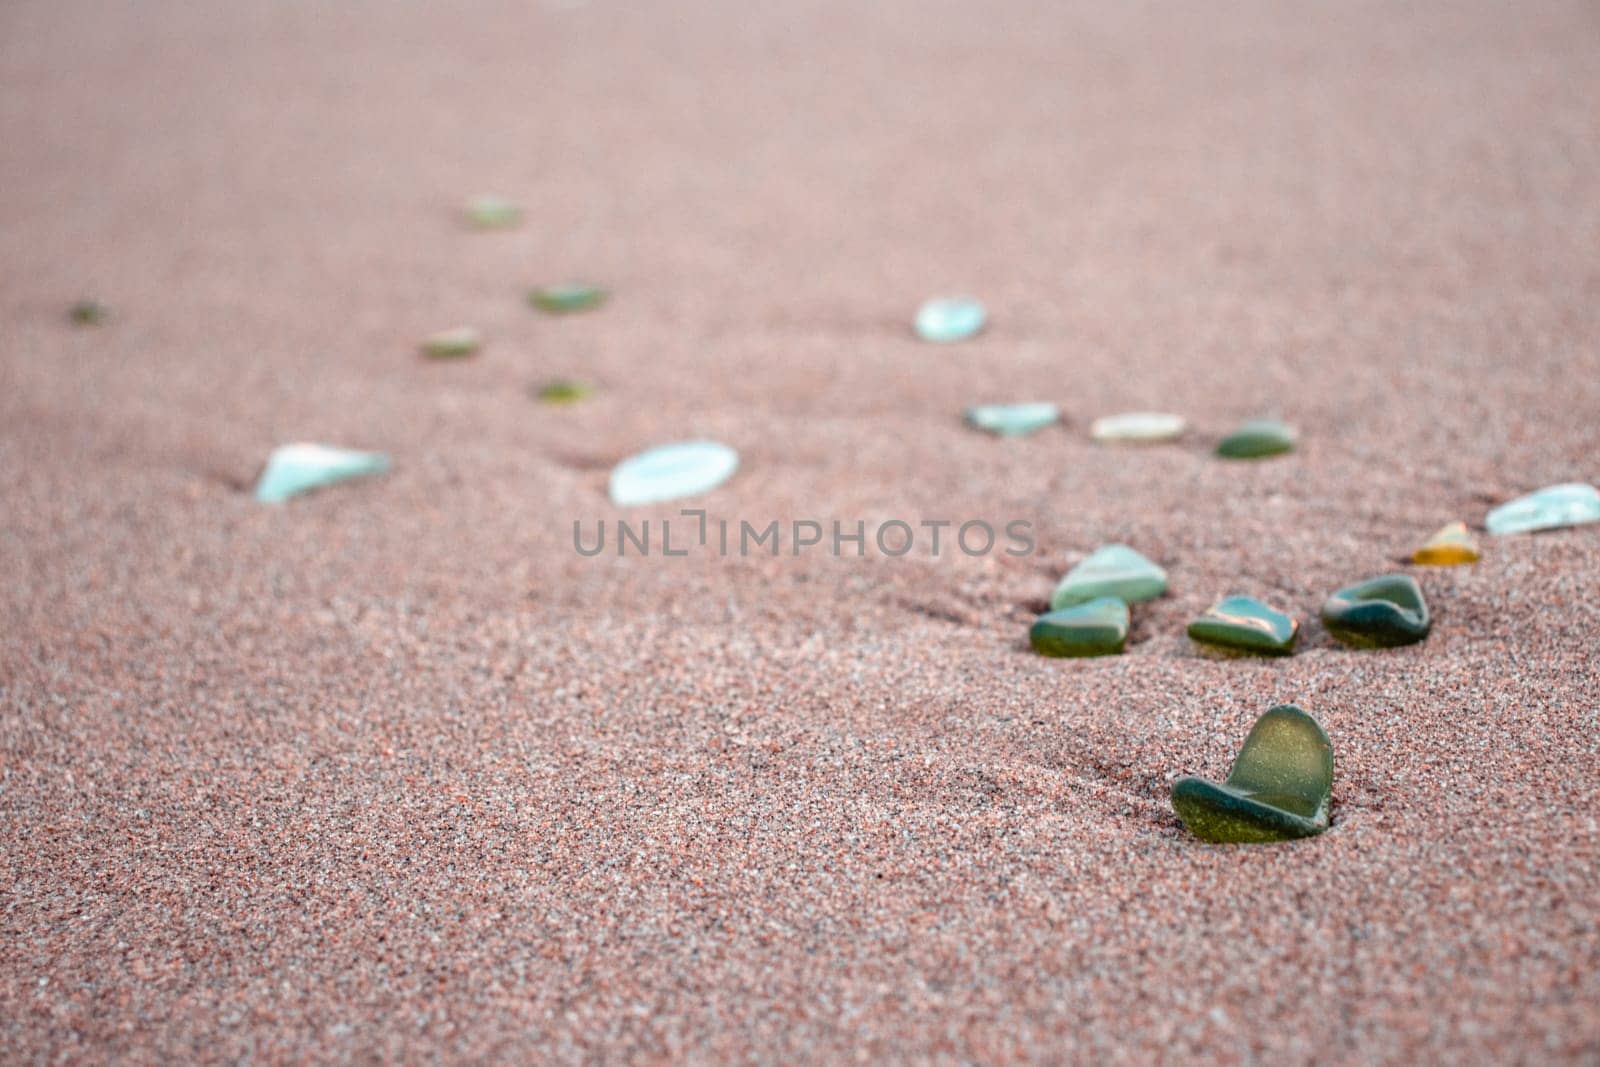 Sand beach and stones with foam concept photo. Glass stones from broken bottles polished by the sea. Front view photography with blurred background. High quality picture for wallpaper, travel blog